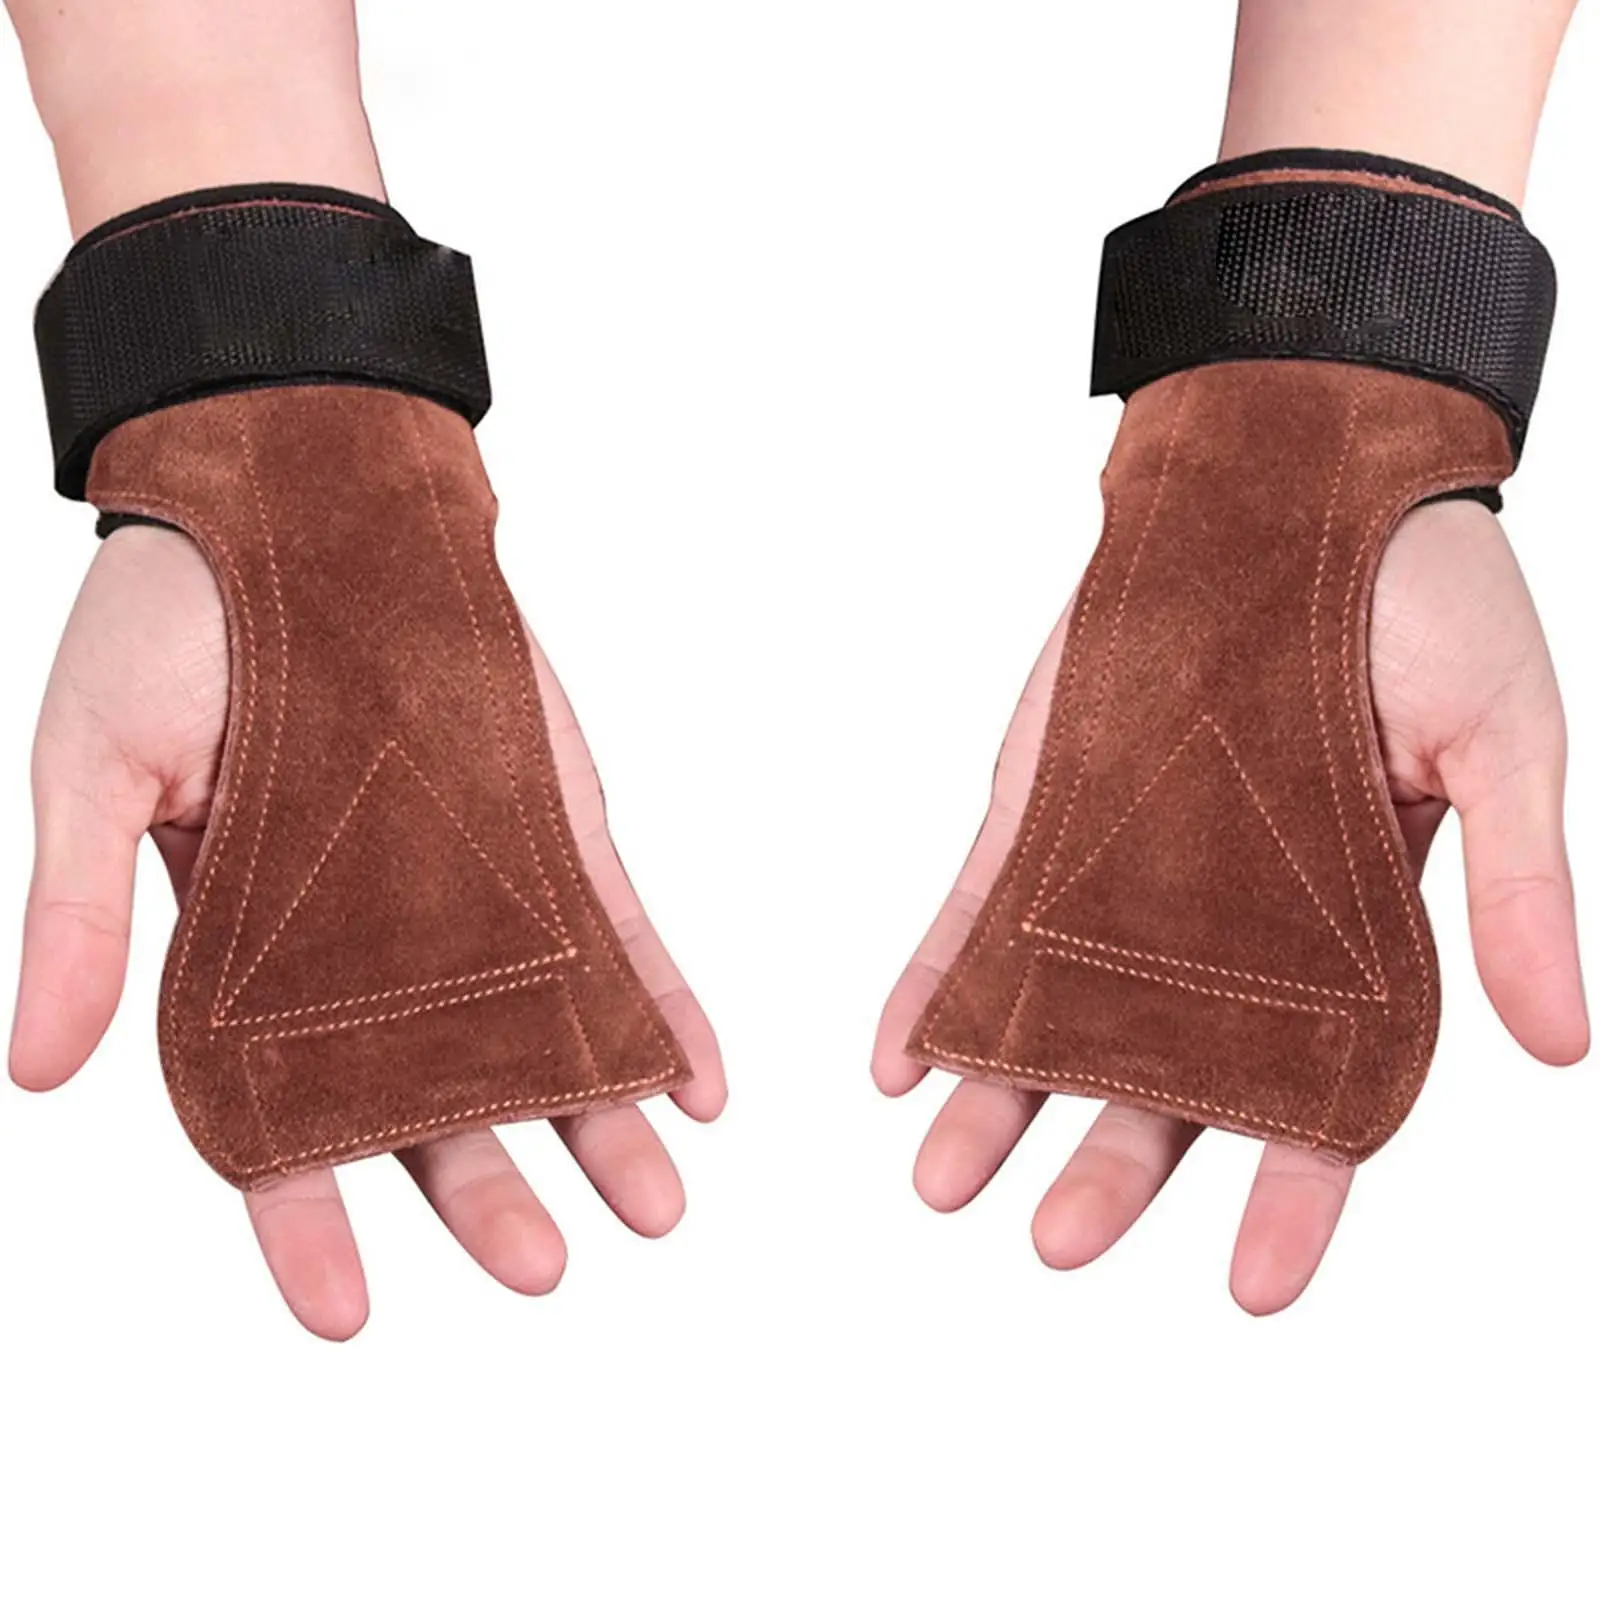  Weightlifting Hand Grips for Men and Women Leather Palm Grip, Anti Slip Weightlifting Gloves for Deadlifting Powerlifting Gym